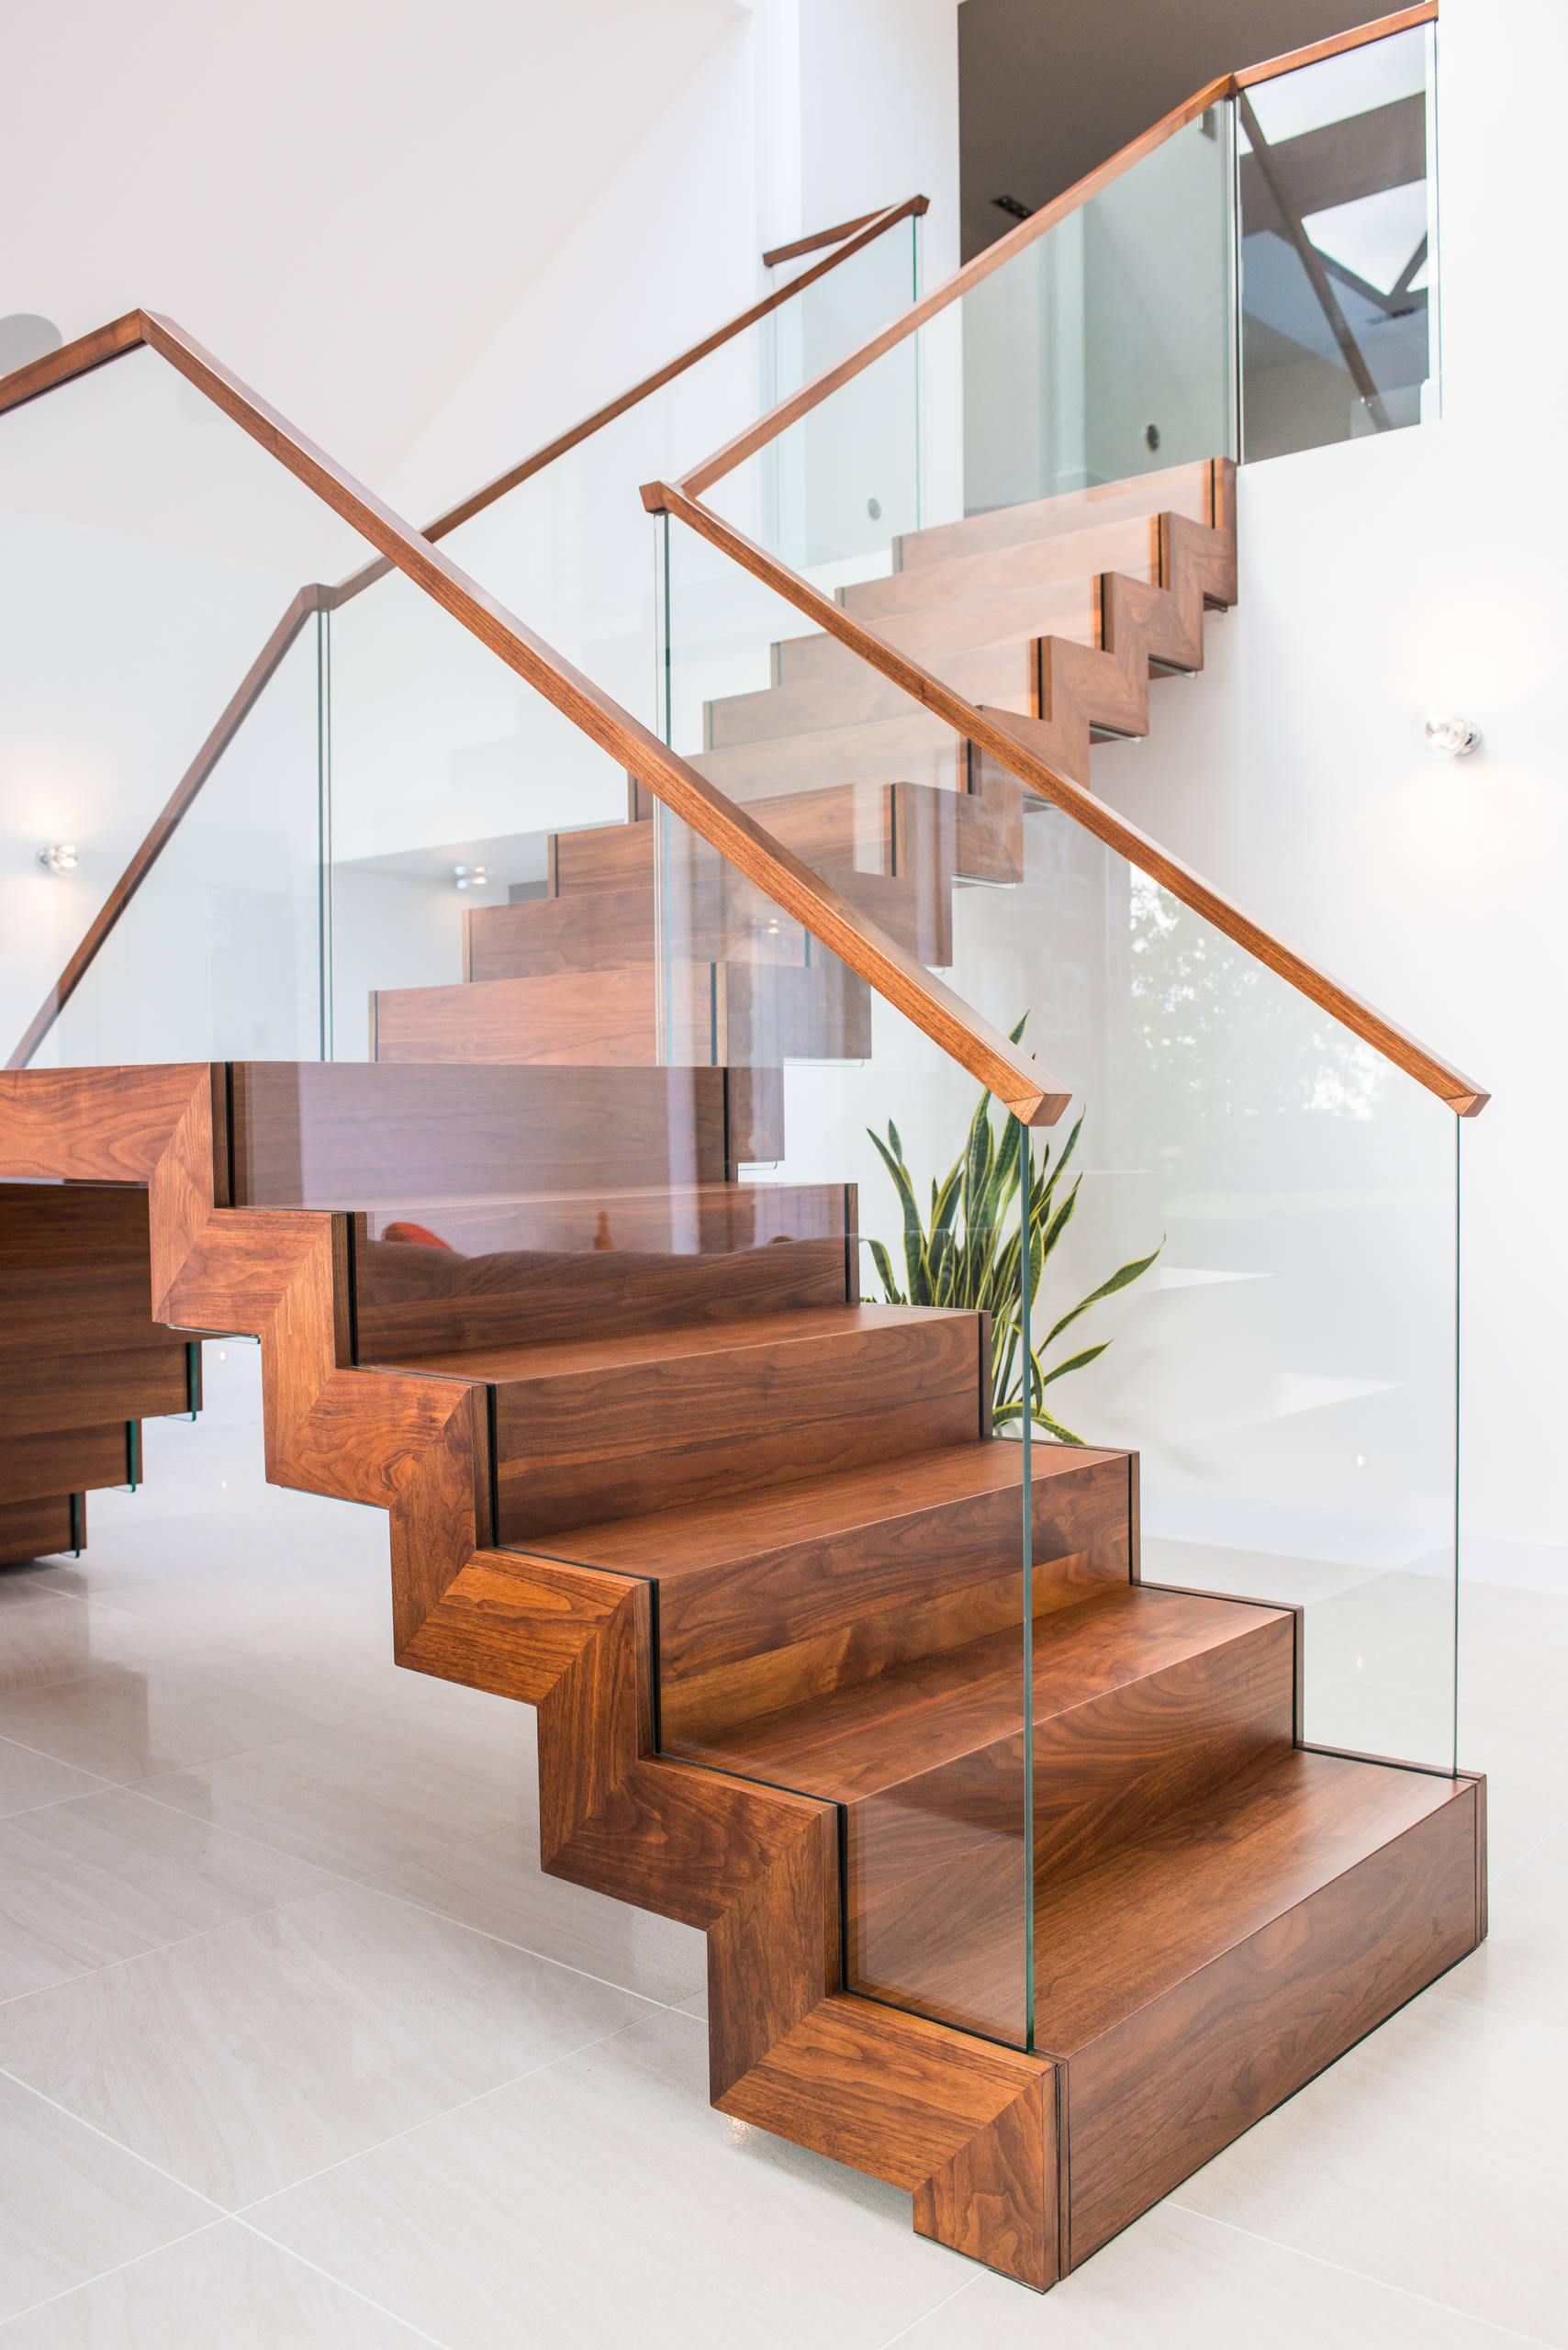 How do Zig Zag Staircases work? Zig Zag Stairs Design & Costruction